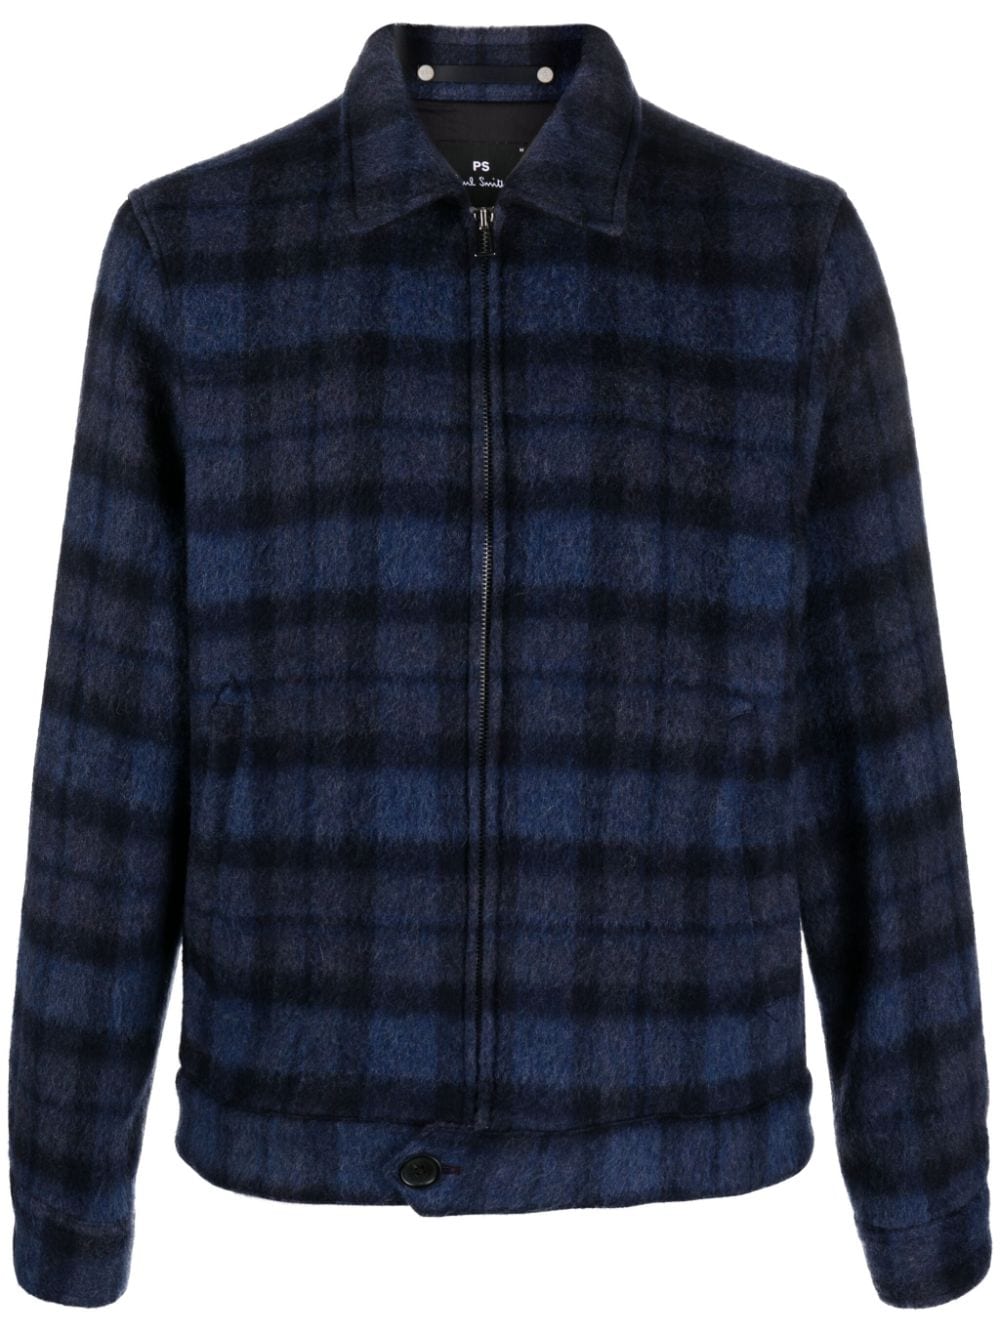 PS Paul Smith check-print zip-up jacket - Blue von PS Paul Smith